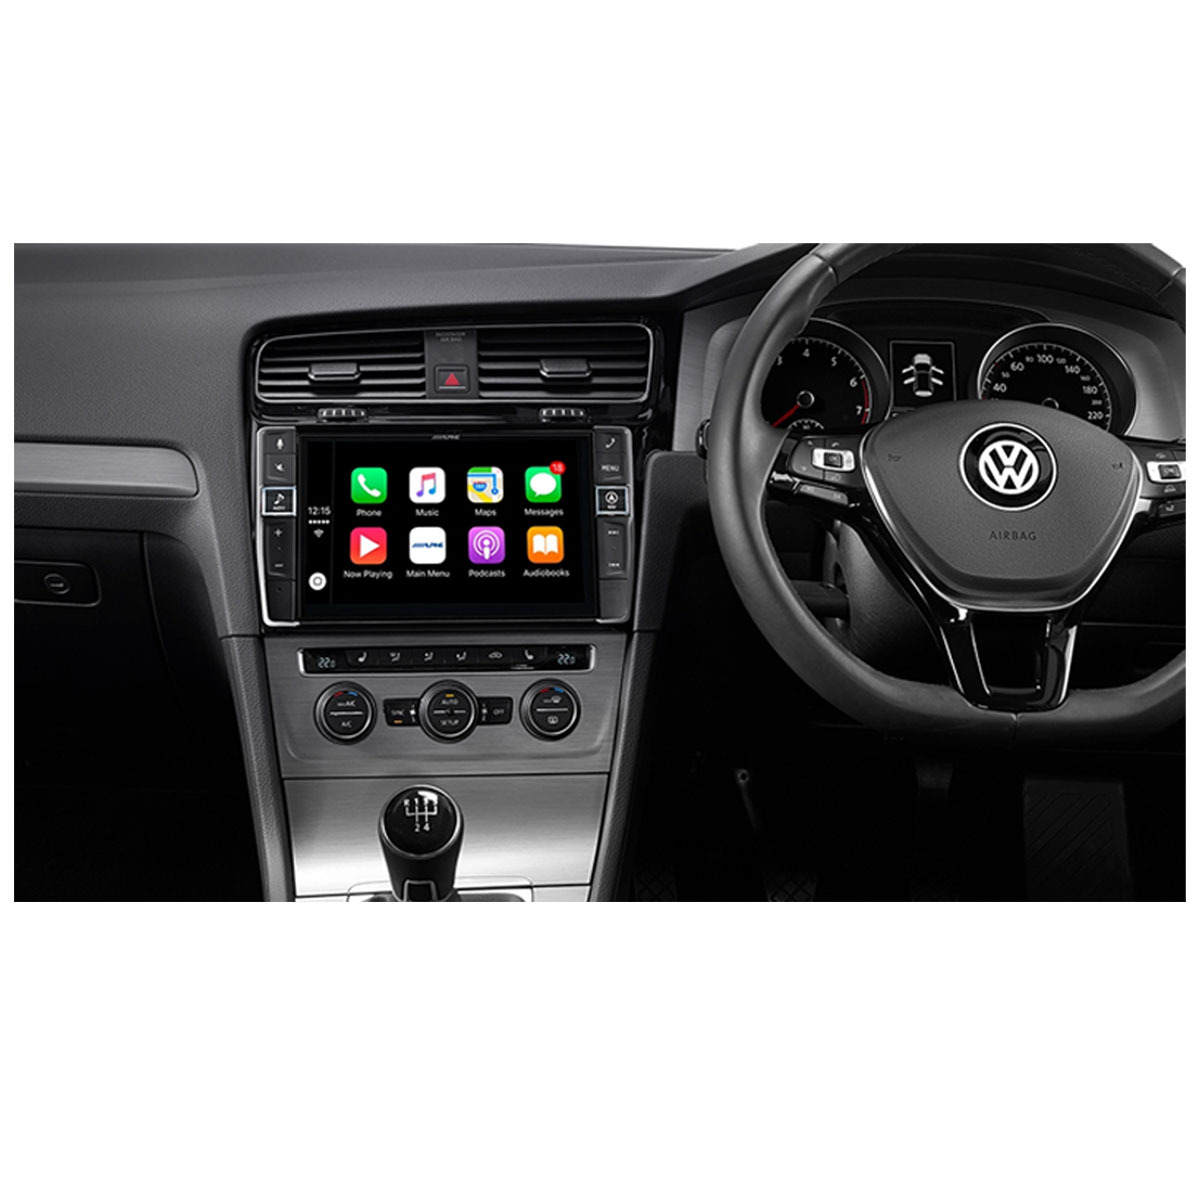 Alpine i902D-G7 9" Apple Carplay/Android Auto Upgrade to suit VW Golf 7